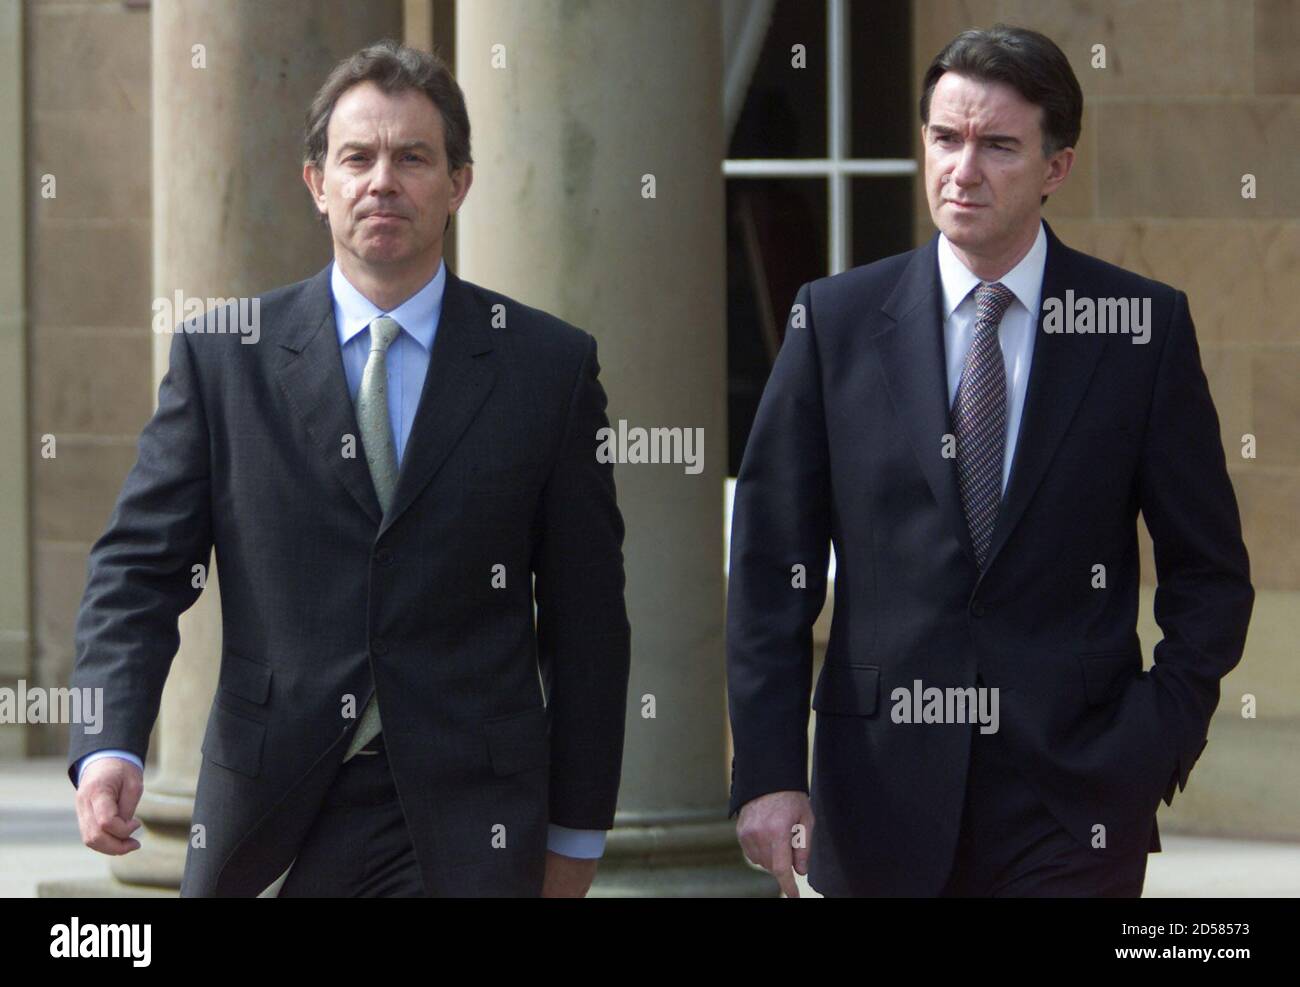 Prime Minister Tony Blair (L) walks alongside Northern Ireland Secretary Peter Mandelson apon his arrival at Hillsborough Castle, County Down, Northern Ireland, April 18. Blair, who flew in on a one-day visit, will hold talks with both Roman Catholic and Protestant party leaders to assess the current logjam in the peace pact he helped launch two years ago.  PM Stock Photo